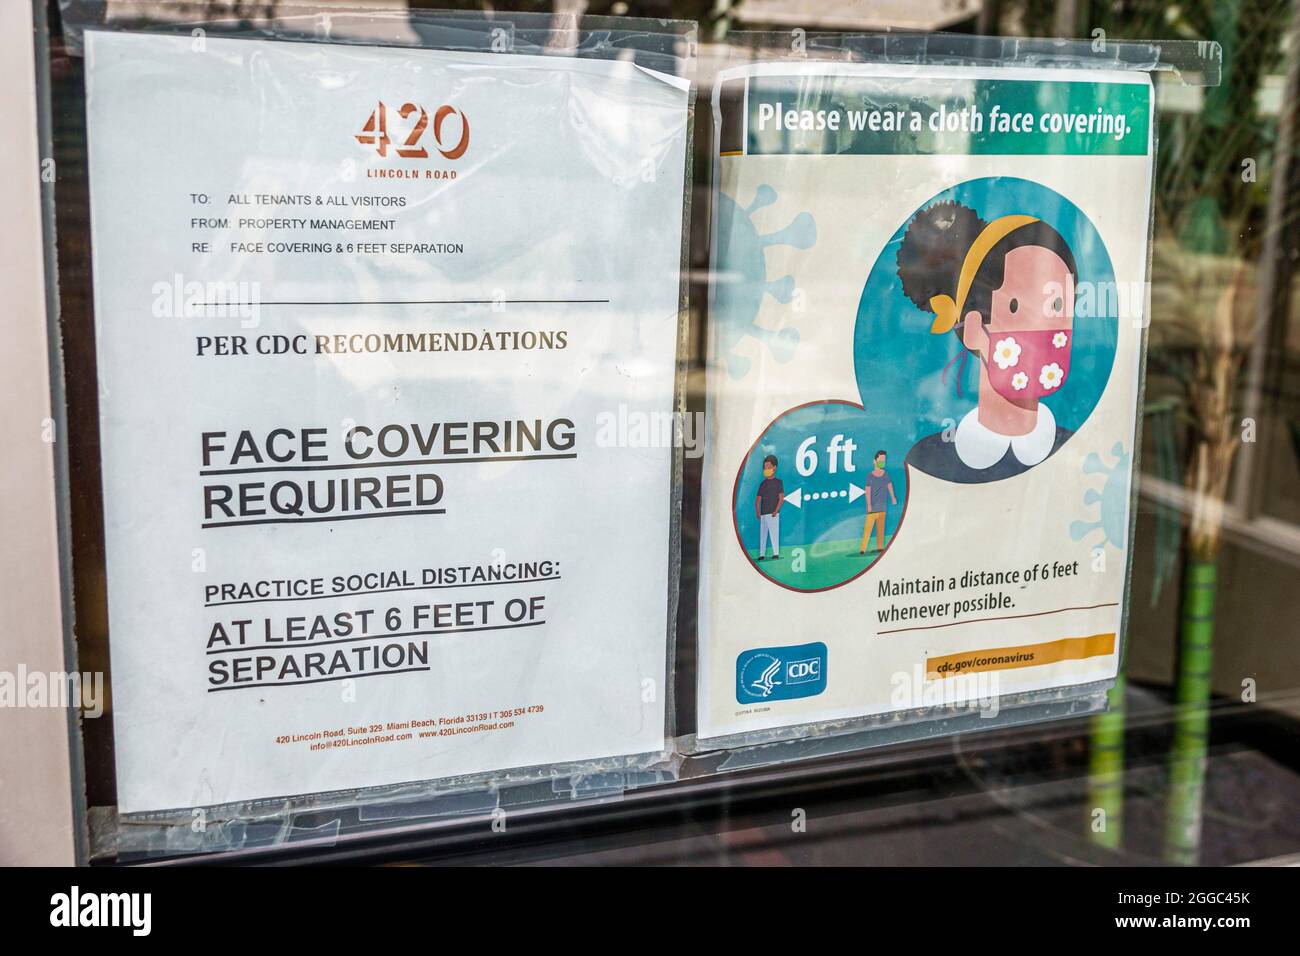 Miami Beach Florida 420 Lincoln Road office building entrance sign notice face covering mask required social distancing Covid-19 health crisis pandemi Stock Photo